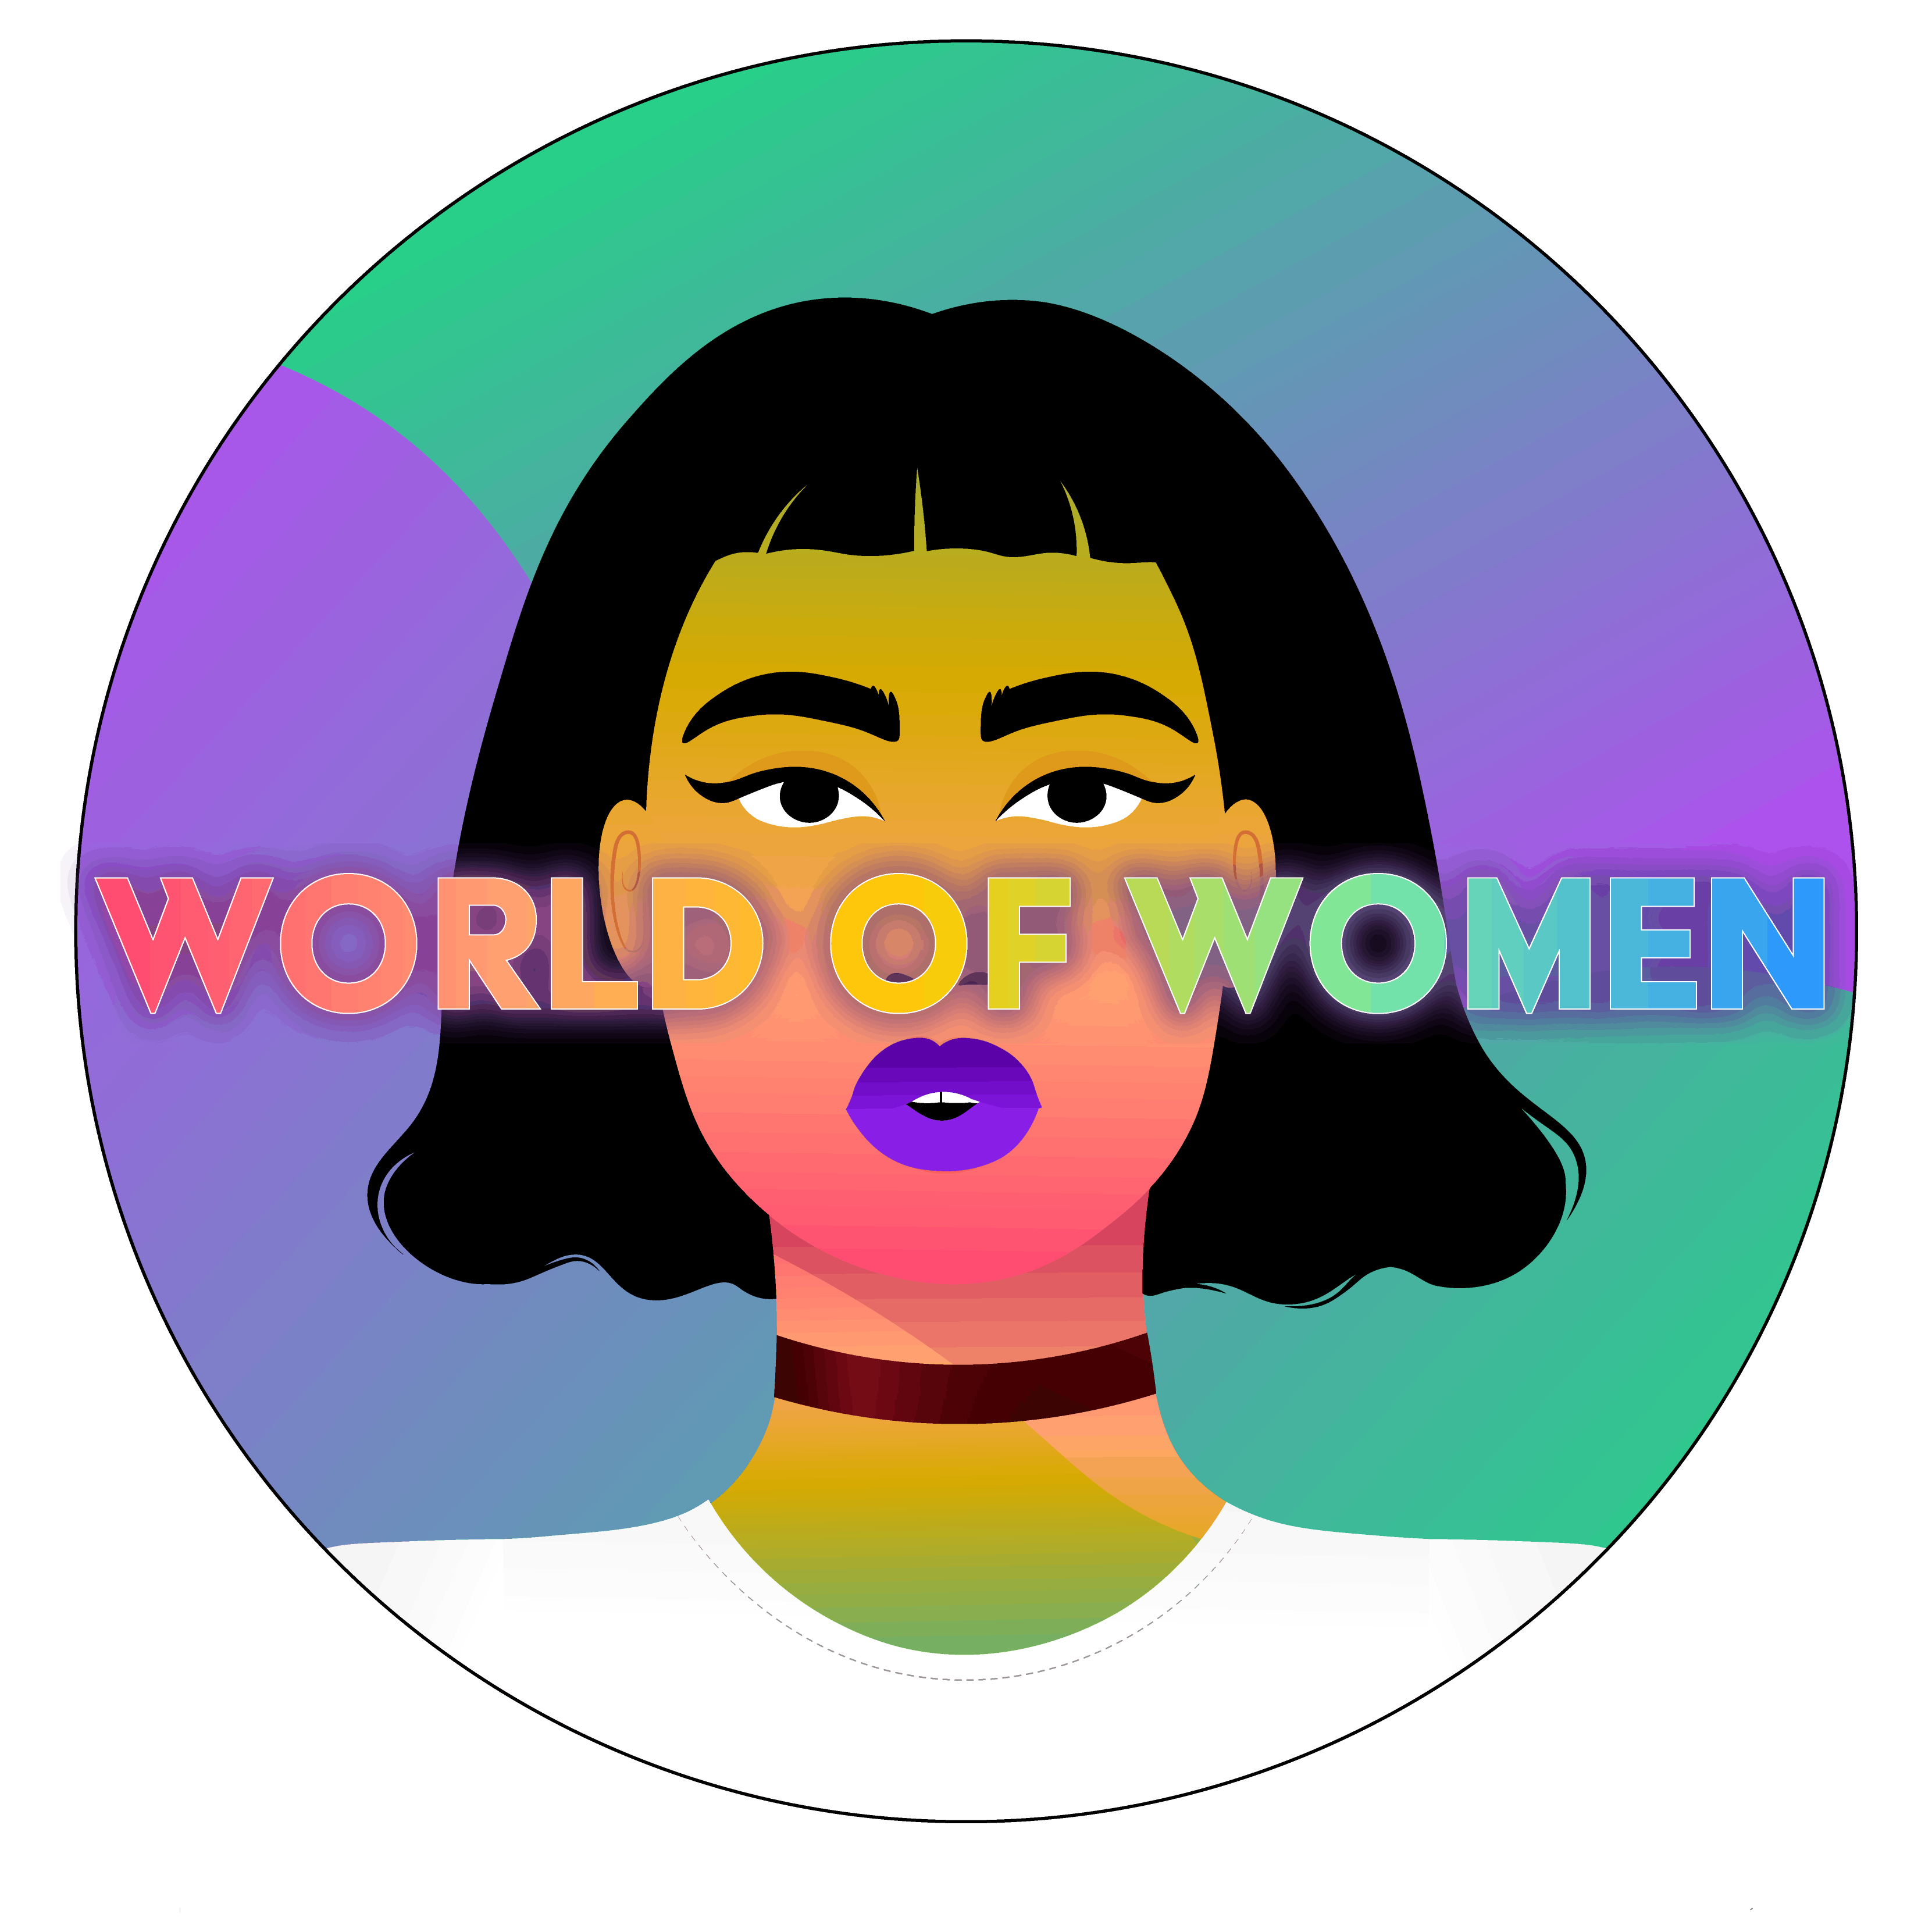 A collection of unique, cool and diverse Women, ready to leave a mark in the NFT space! 

World of women are 10,000 randomly generated digital collectible of various rarity living on the Ethereum blockchain as ERC-721 tokens and hosted on IPFS. 

Beyond incredible art, they support World of Women is an NFT collection that aims to bring representation and diversity into the NFT space. WoW reinvests a percentage of all primary sales into crypto art and donates to causes such as She's the First, Too Young to Wed, and Strange Cintia. Unstoppable Domains wants to move these values forward to Web3 by supporting this project and their community!